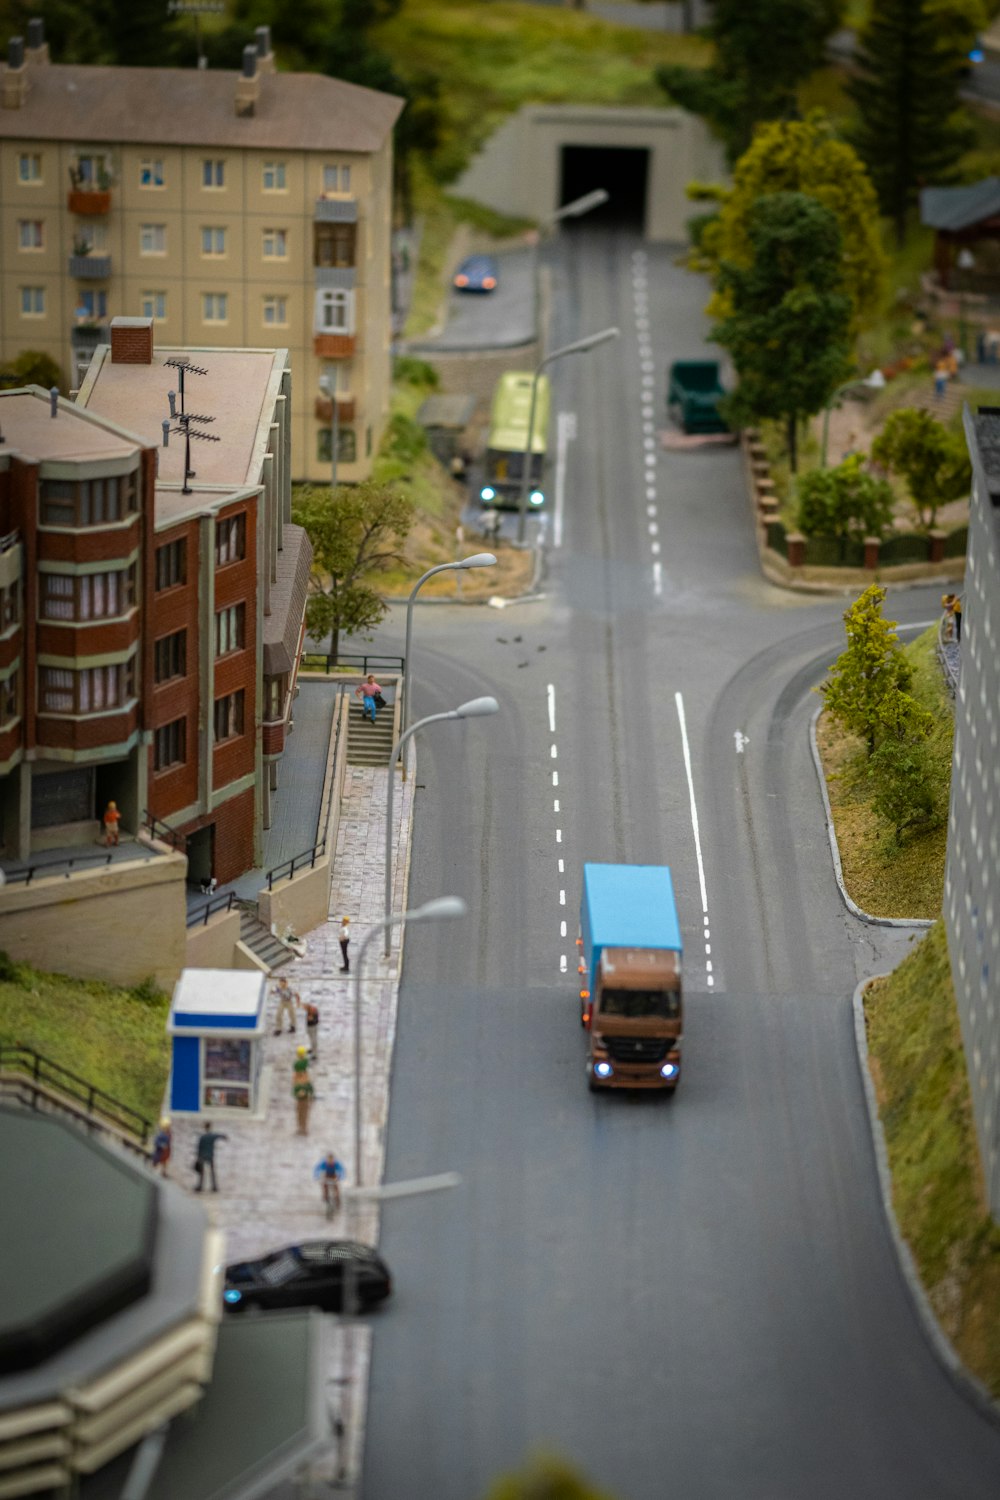 a toy model of a city street with a bus